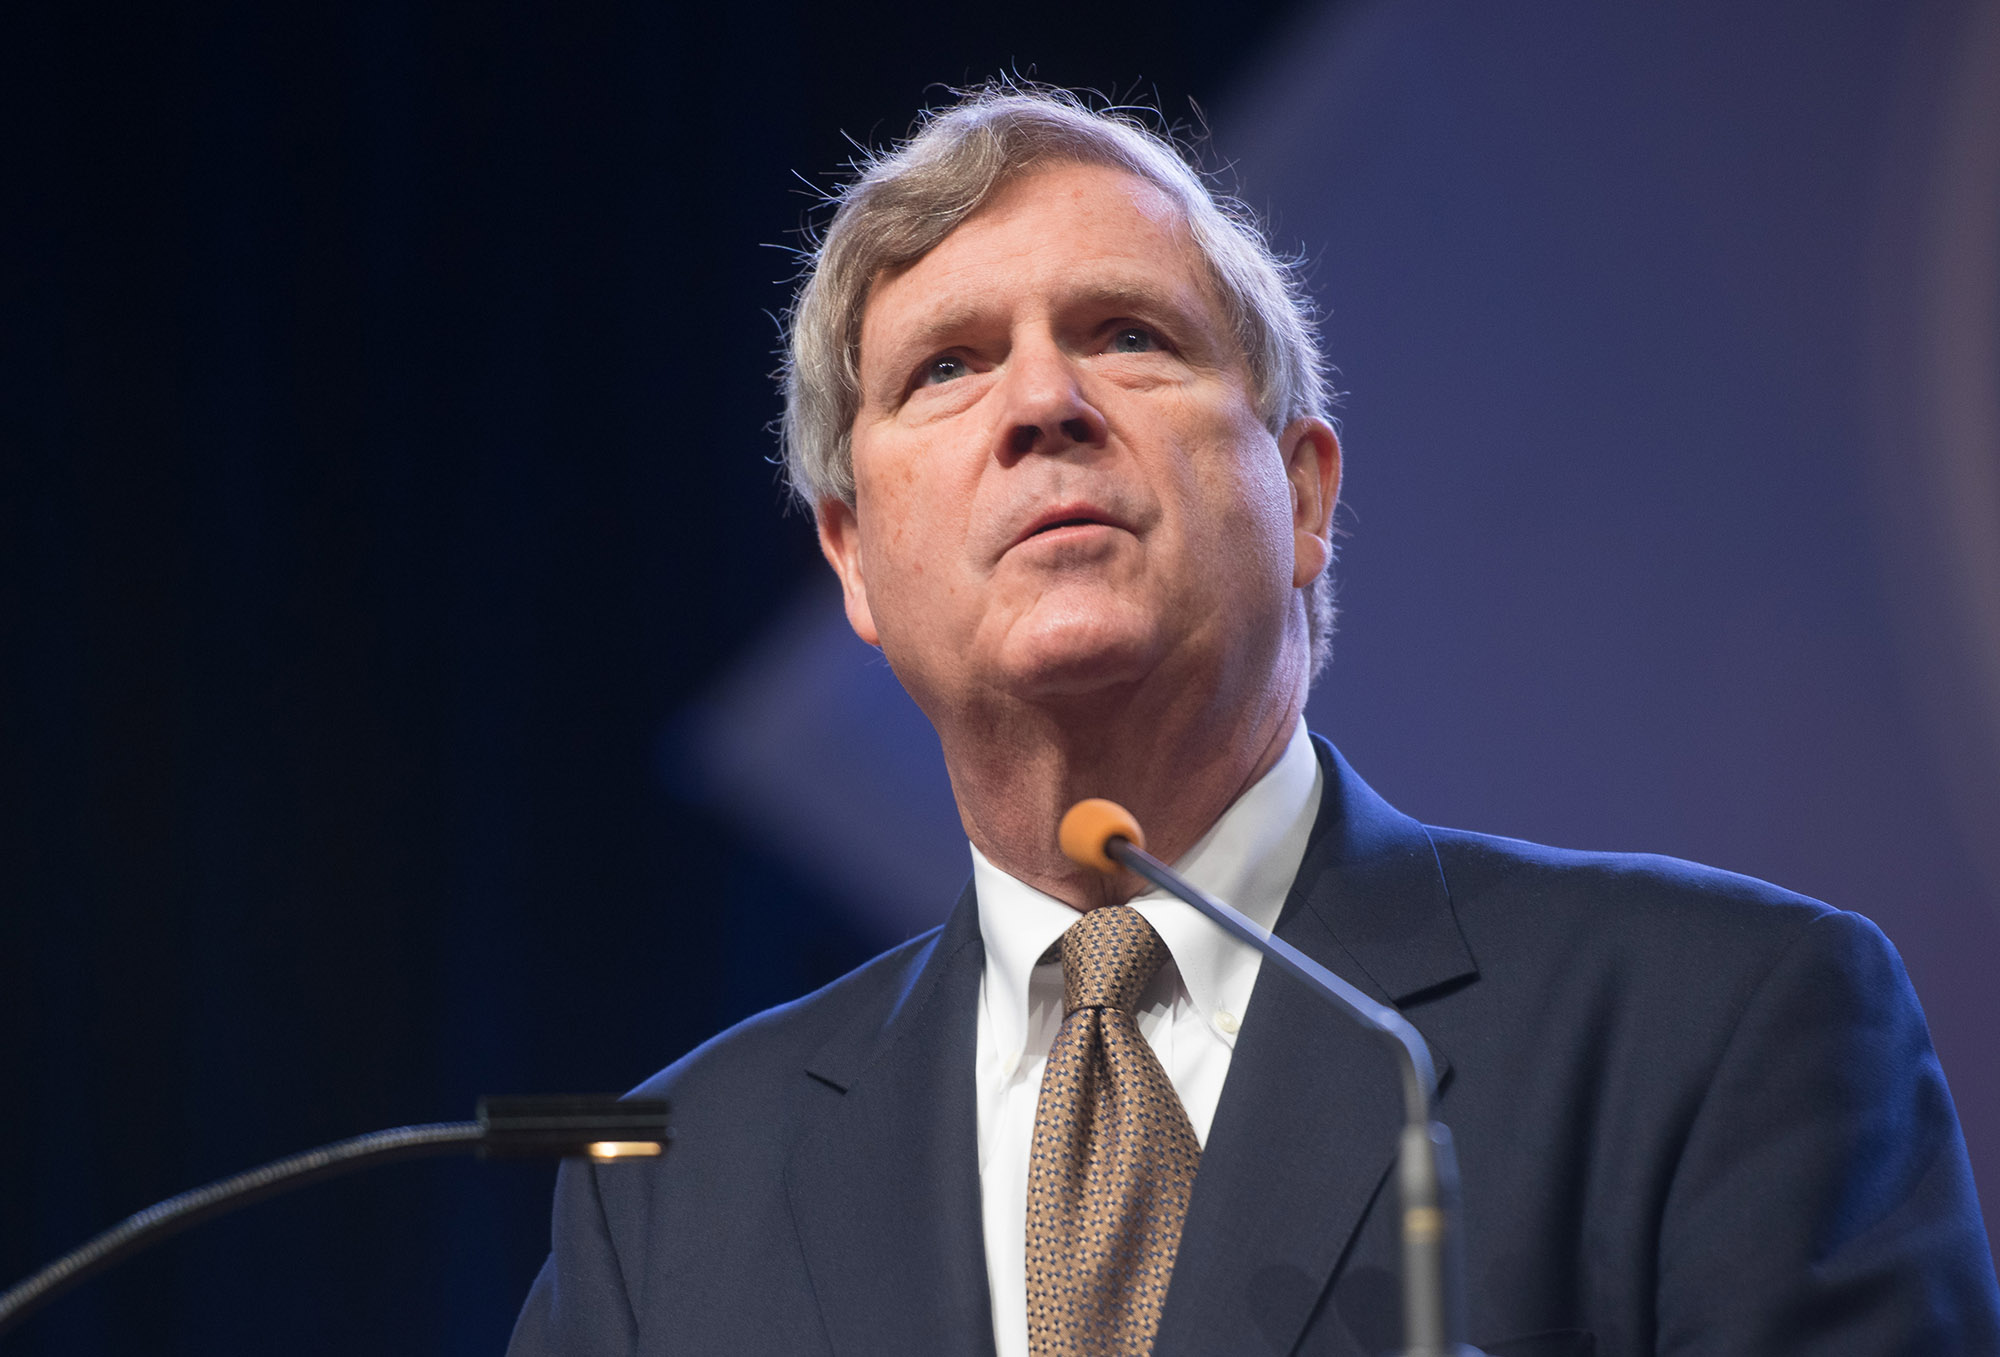 Tom Vilsack is set to serve farmers as the Secretary of